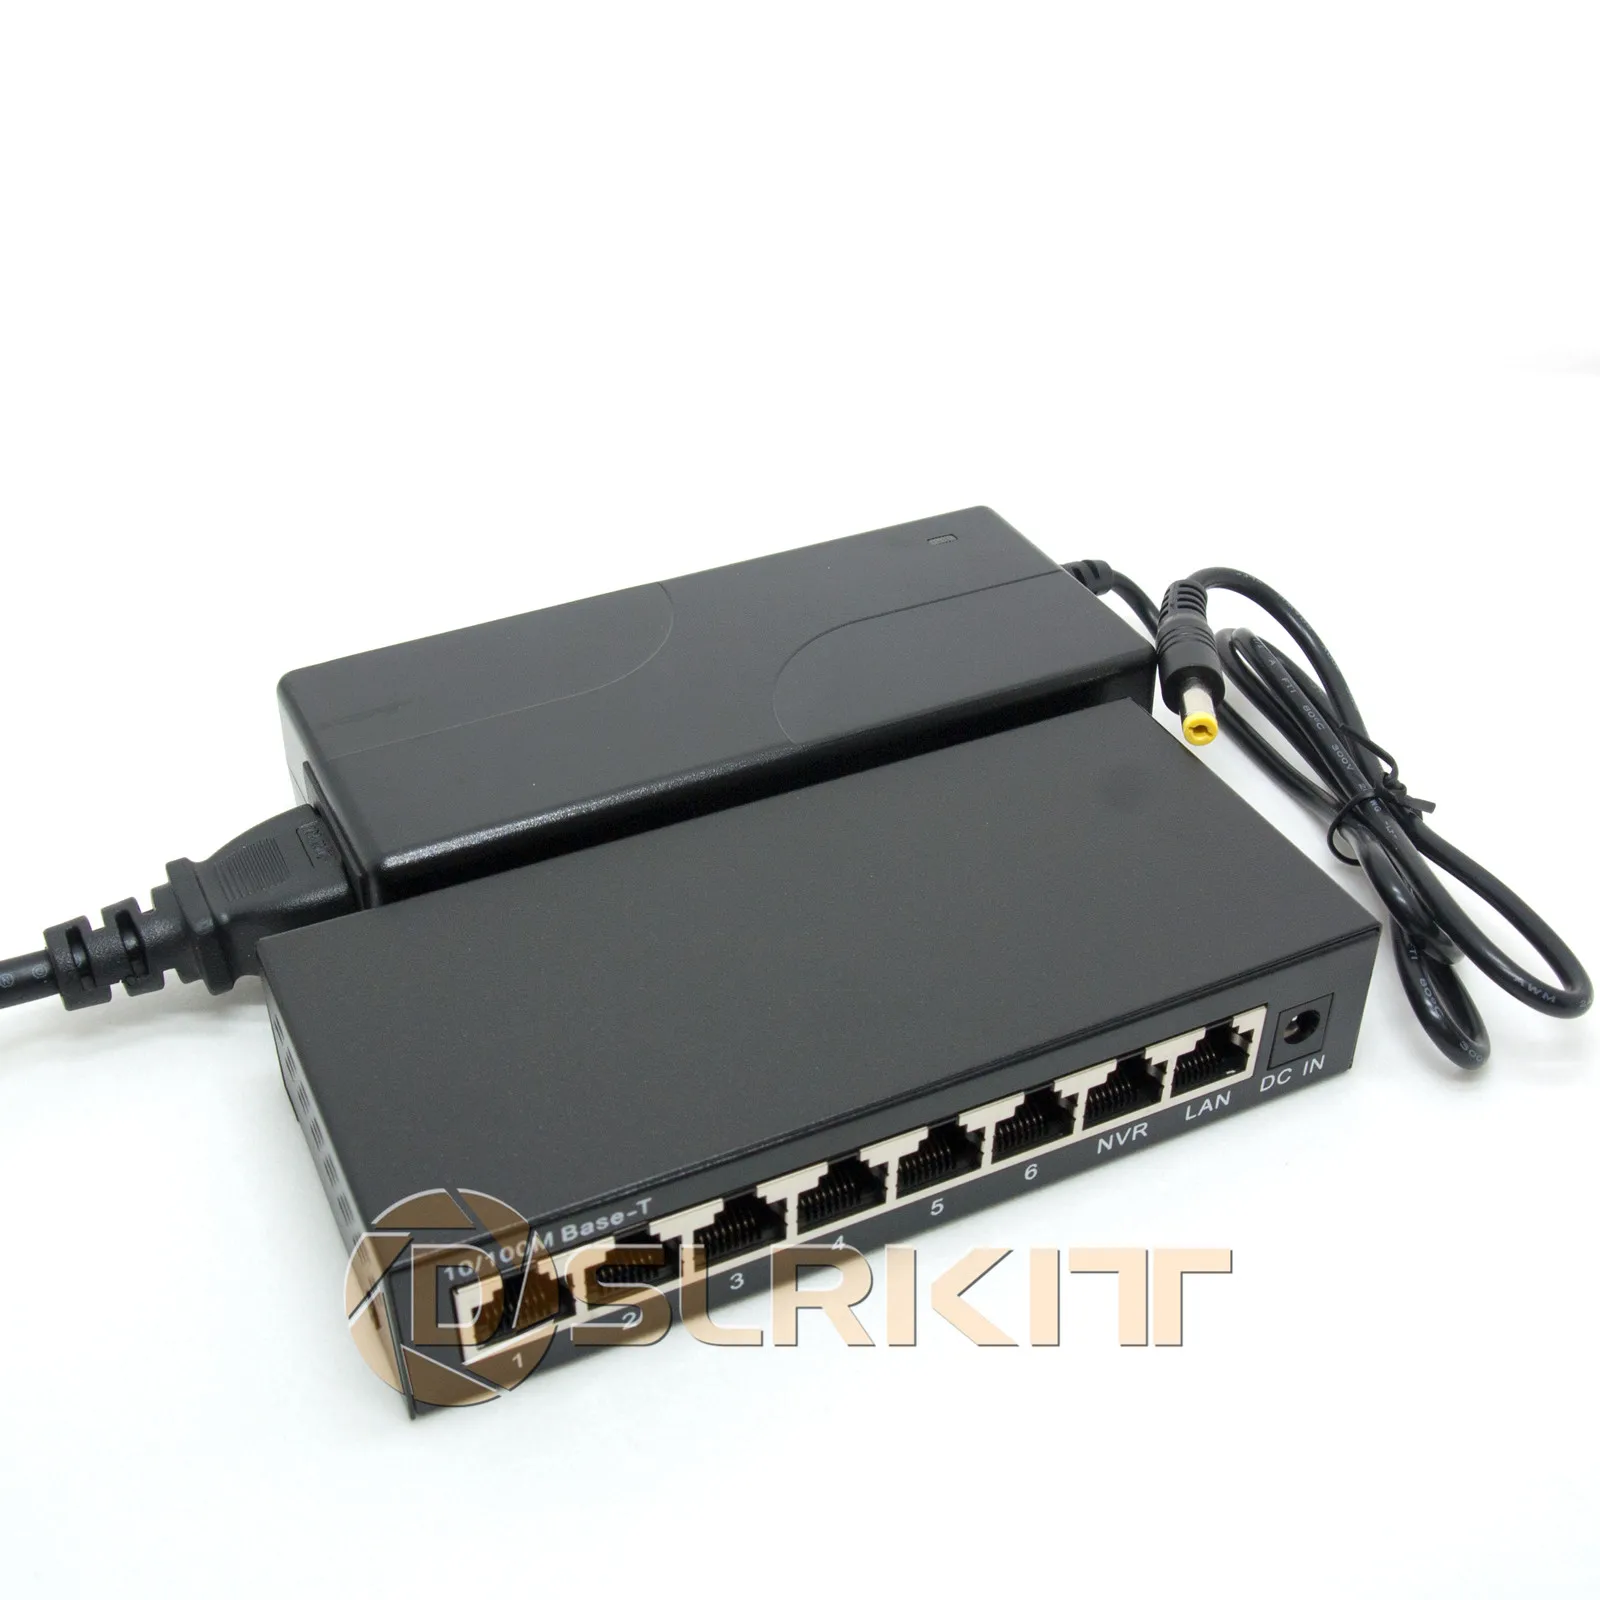 dslrkit-52v-90w-250m-8-ports-6-poe-switch-injector-passive-power-over-ethernet